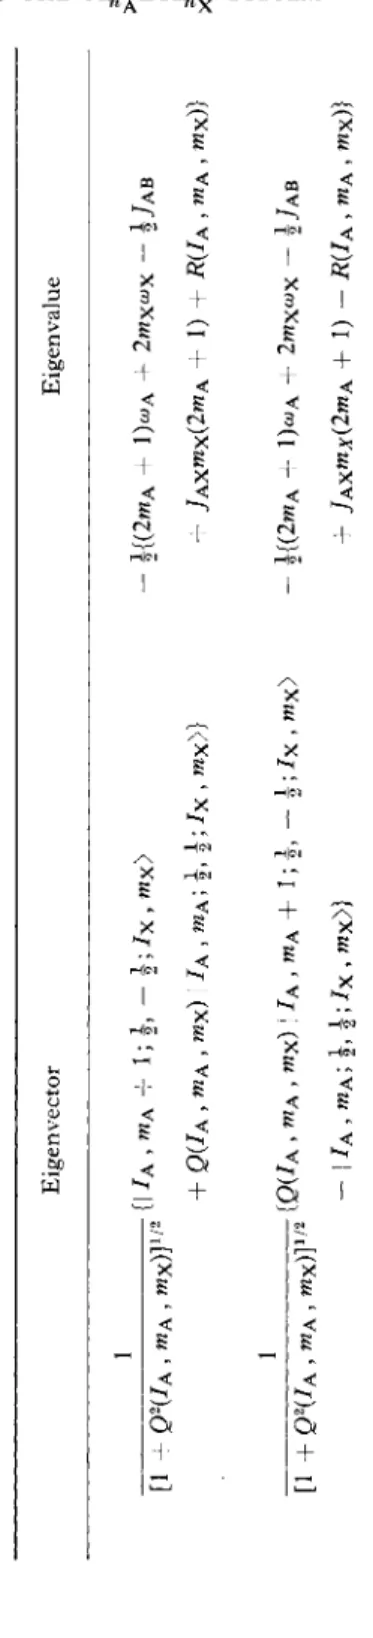 TABLE 7.6  EIGENVALUES AND EIGENVECTORS FOR THE IRREDUCIBLE Α /ΑΒ1/2Χ/Χ SYSTEM  Eigenvector Eigenvalue  • (Ι IA y niA - 1 ; h - 7X » MX&gt; _ i{(2mA + IK + 2ηι ΧωΧ - ijAB  [1 + 02(/ A , MA , MX)]1/2  + Q(^A , ™A , rnx) I J A , mA; J, |; /Χ , MX» + ]Αχηΐχ(2